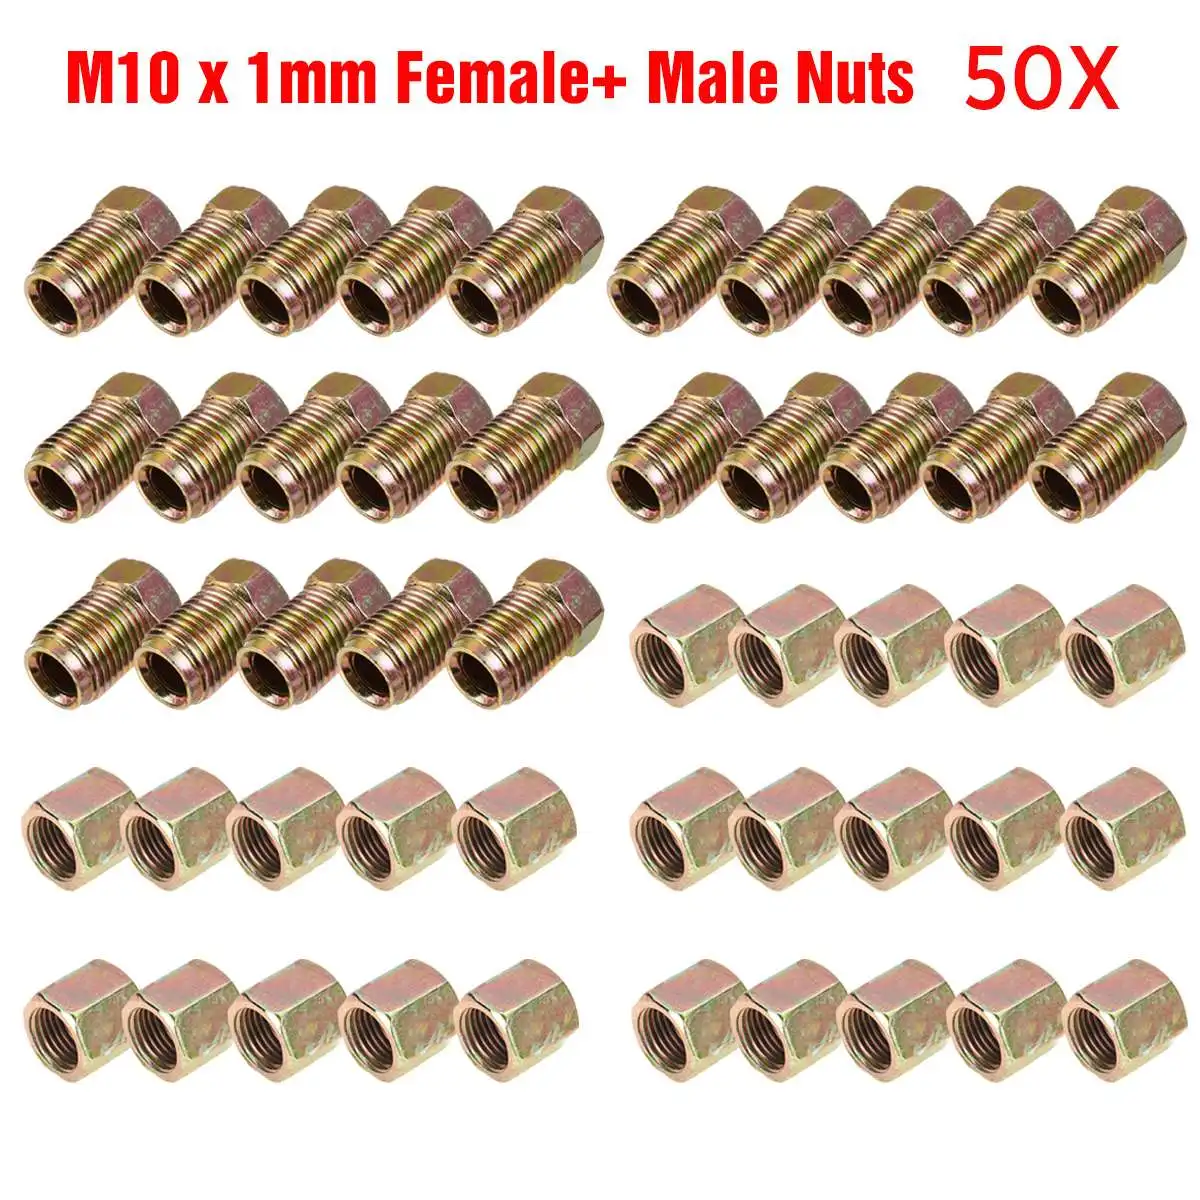 Copper Brake Pipe 25ft 3/16" with 10mm Fittings Male+Female Nuts Unions 20pcs UK